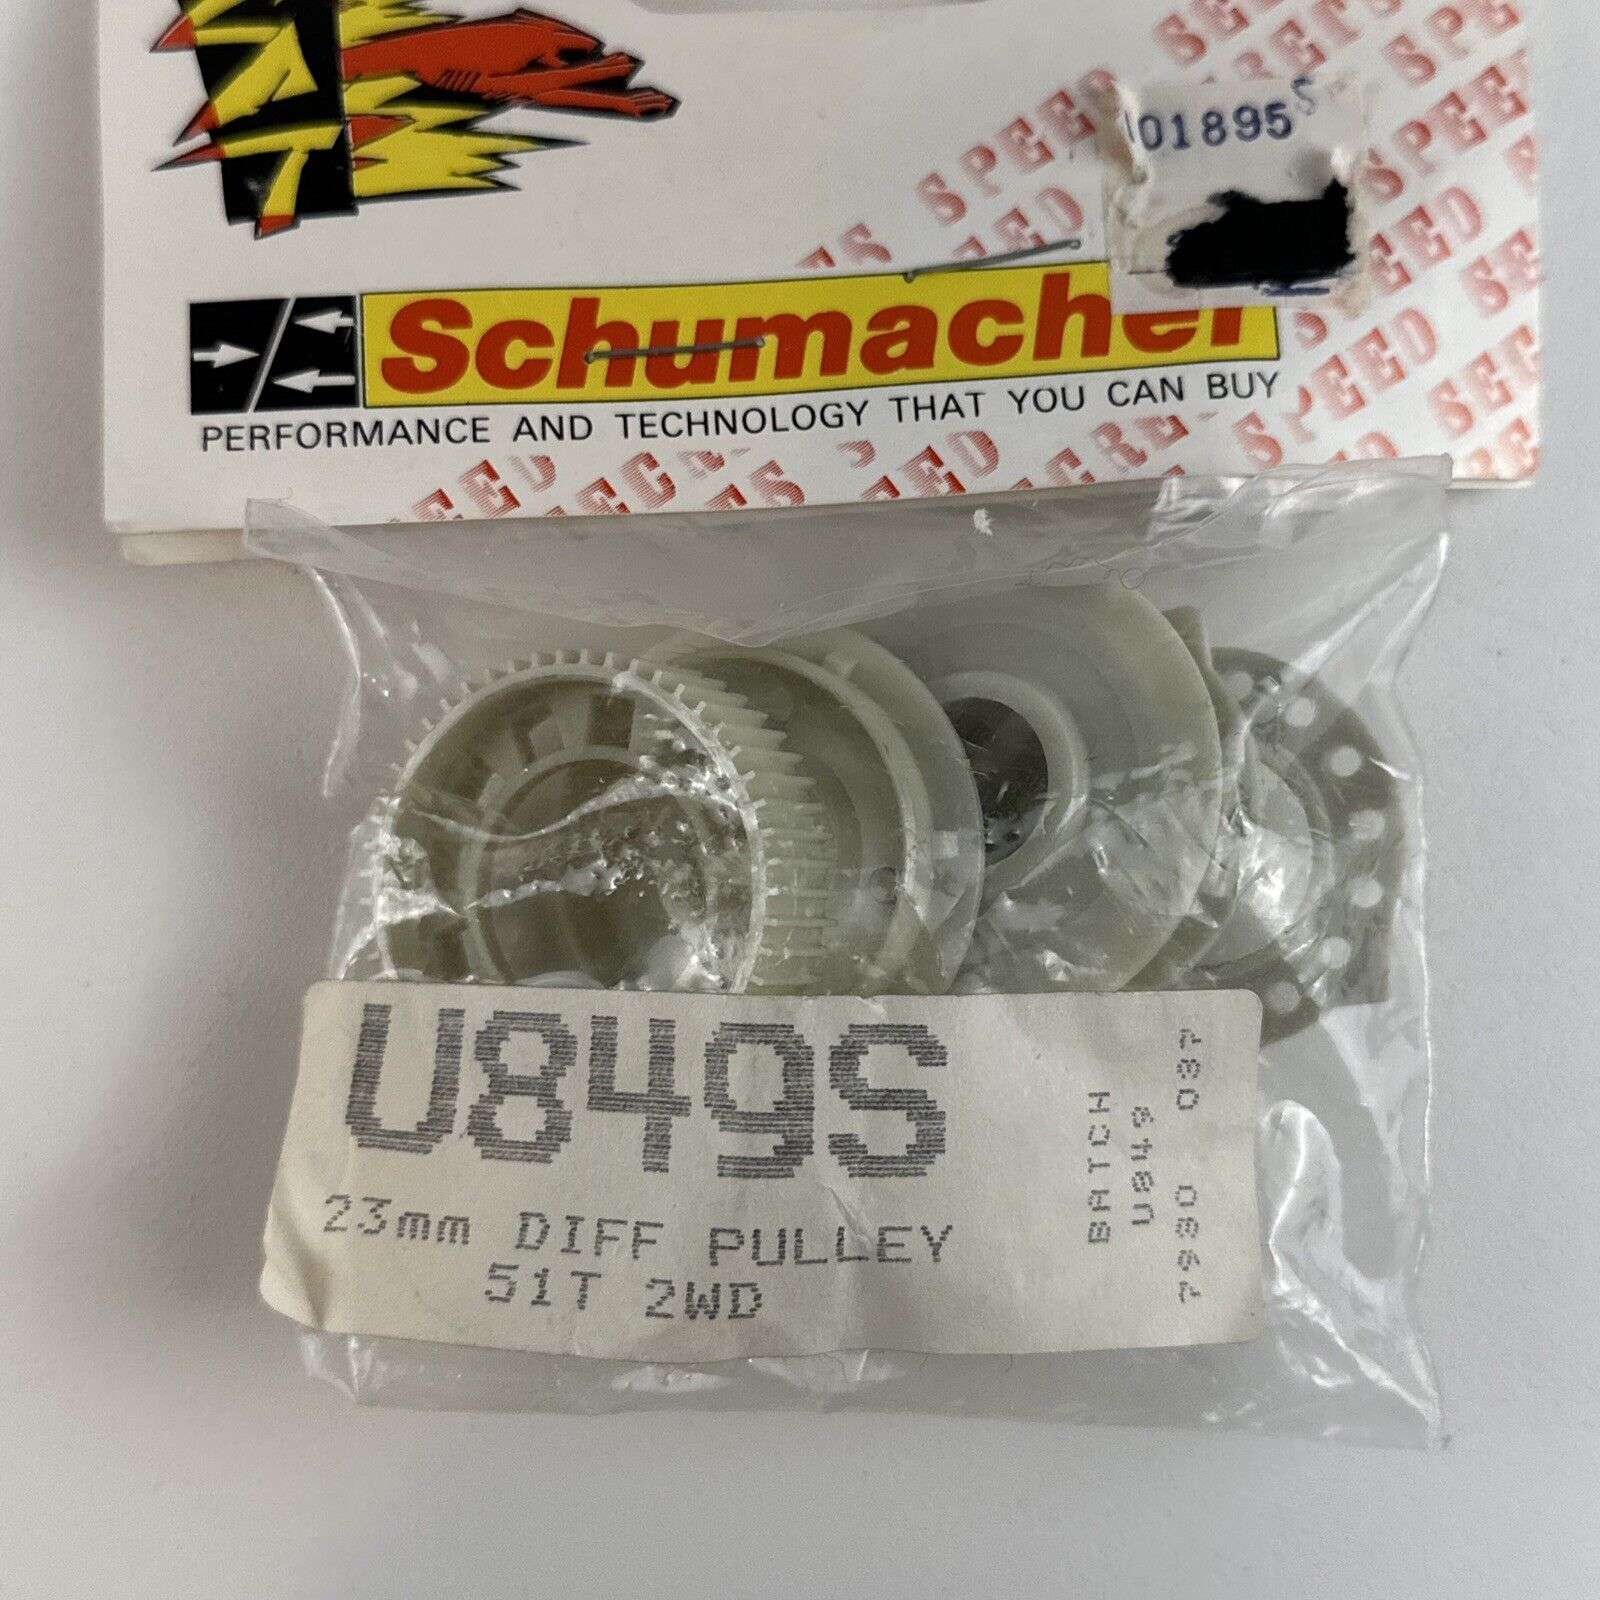 Schumacher U849S 23mm Diff Pulley 51T 2wd Gears Vintage RC Car Buggy